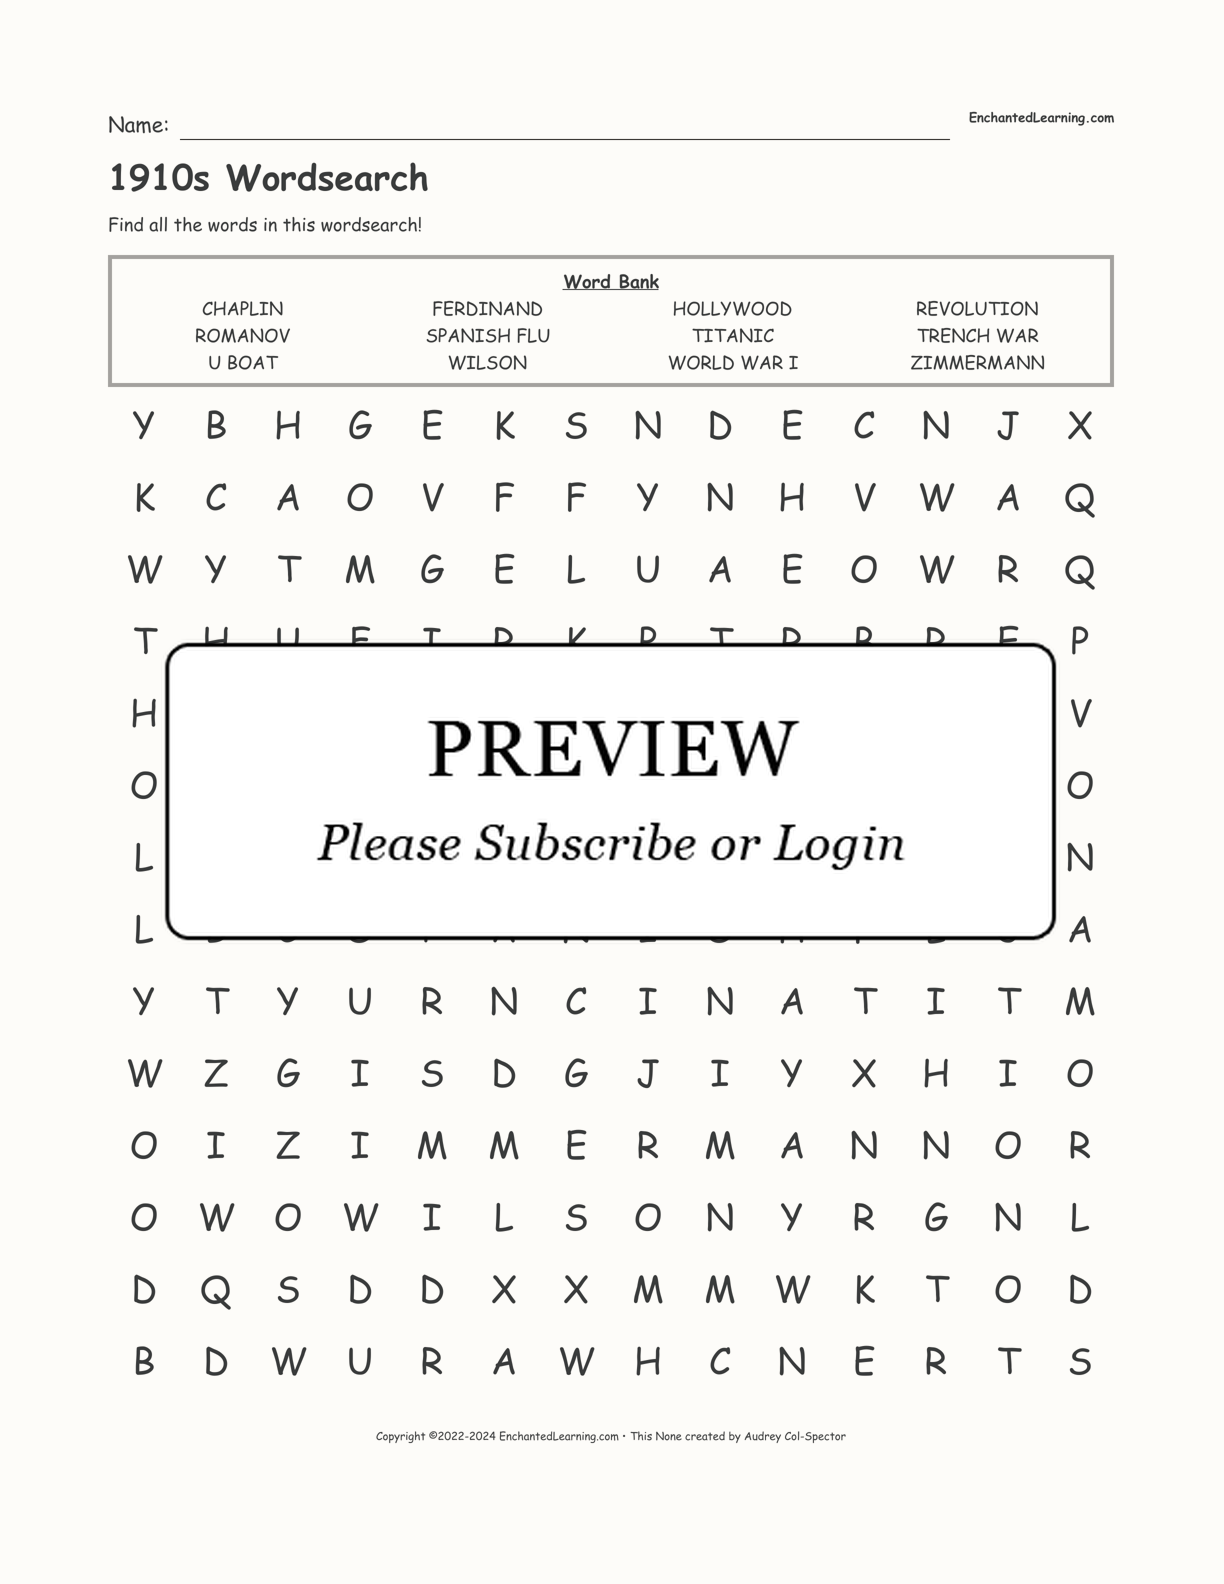 1910s Wordsearch interactive worksheet page 1